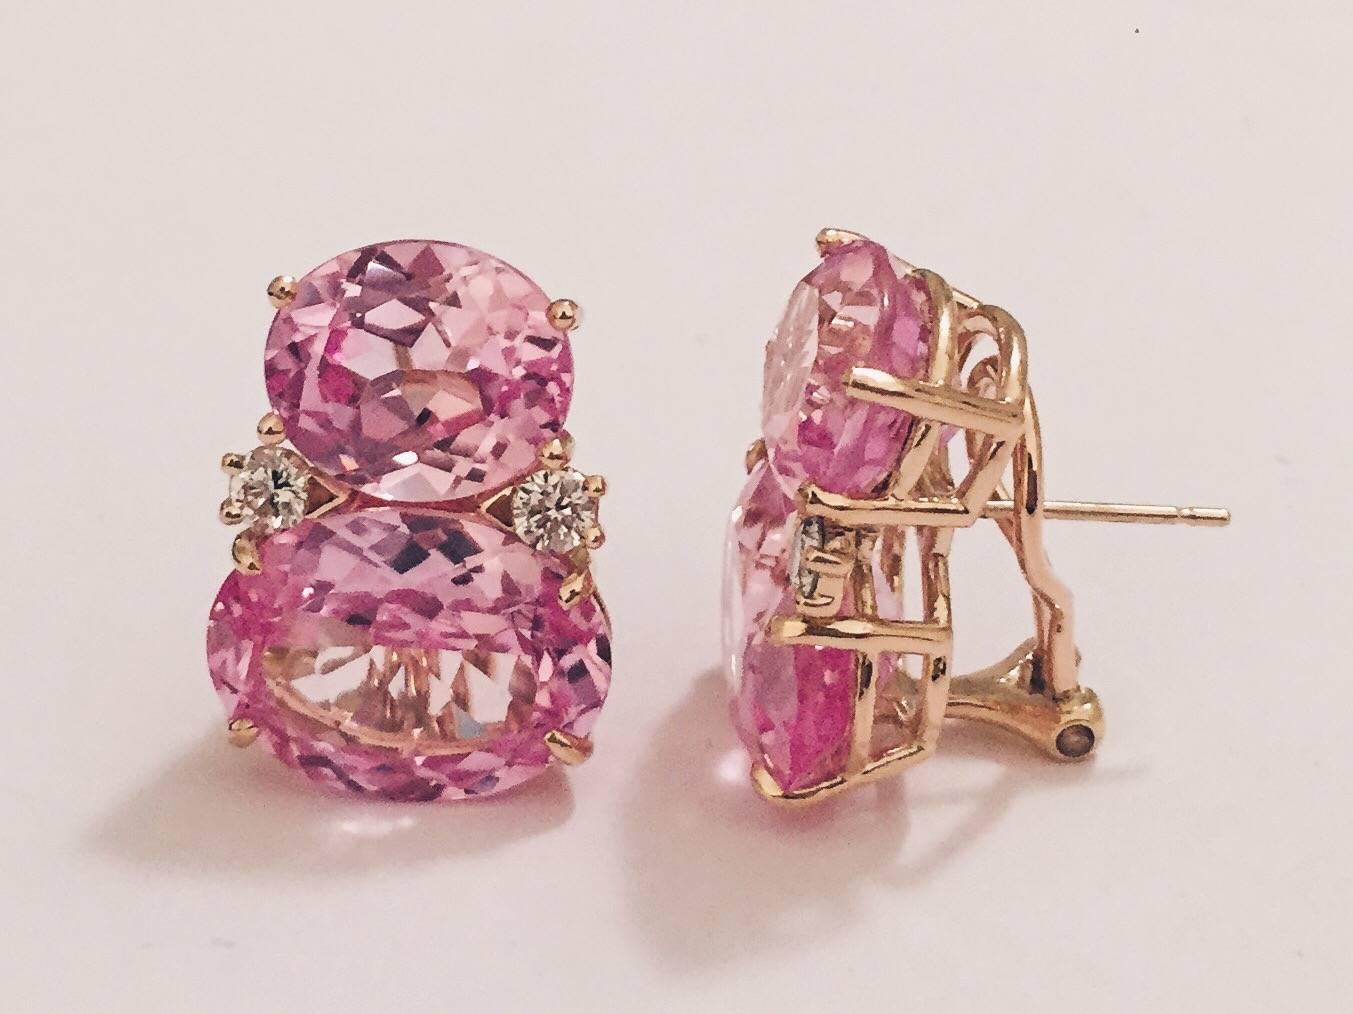 18kt Yellow Gold Large GUM DROP™ Earrings with faceted Pink Topaz and diamonds.  The Top oval Pink Topaz  is approximately 5 cts each and the Bottom faceted Pink Topaz is approximately 12 cts each, and 4 diamonds weighing approximately 0.60cts 